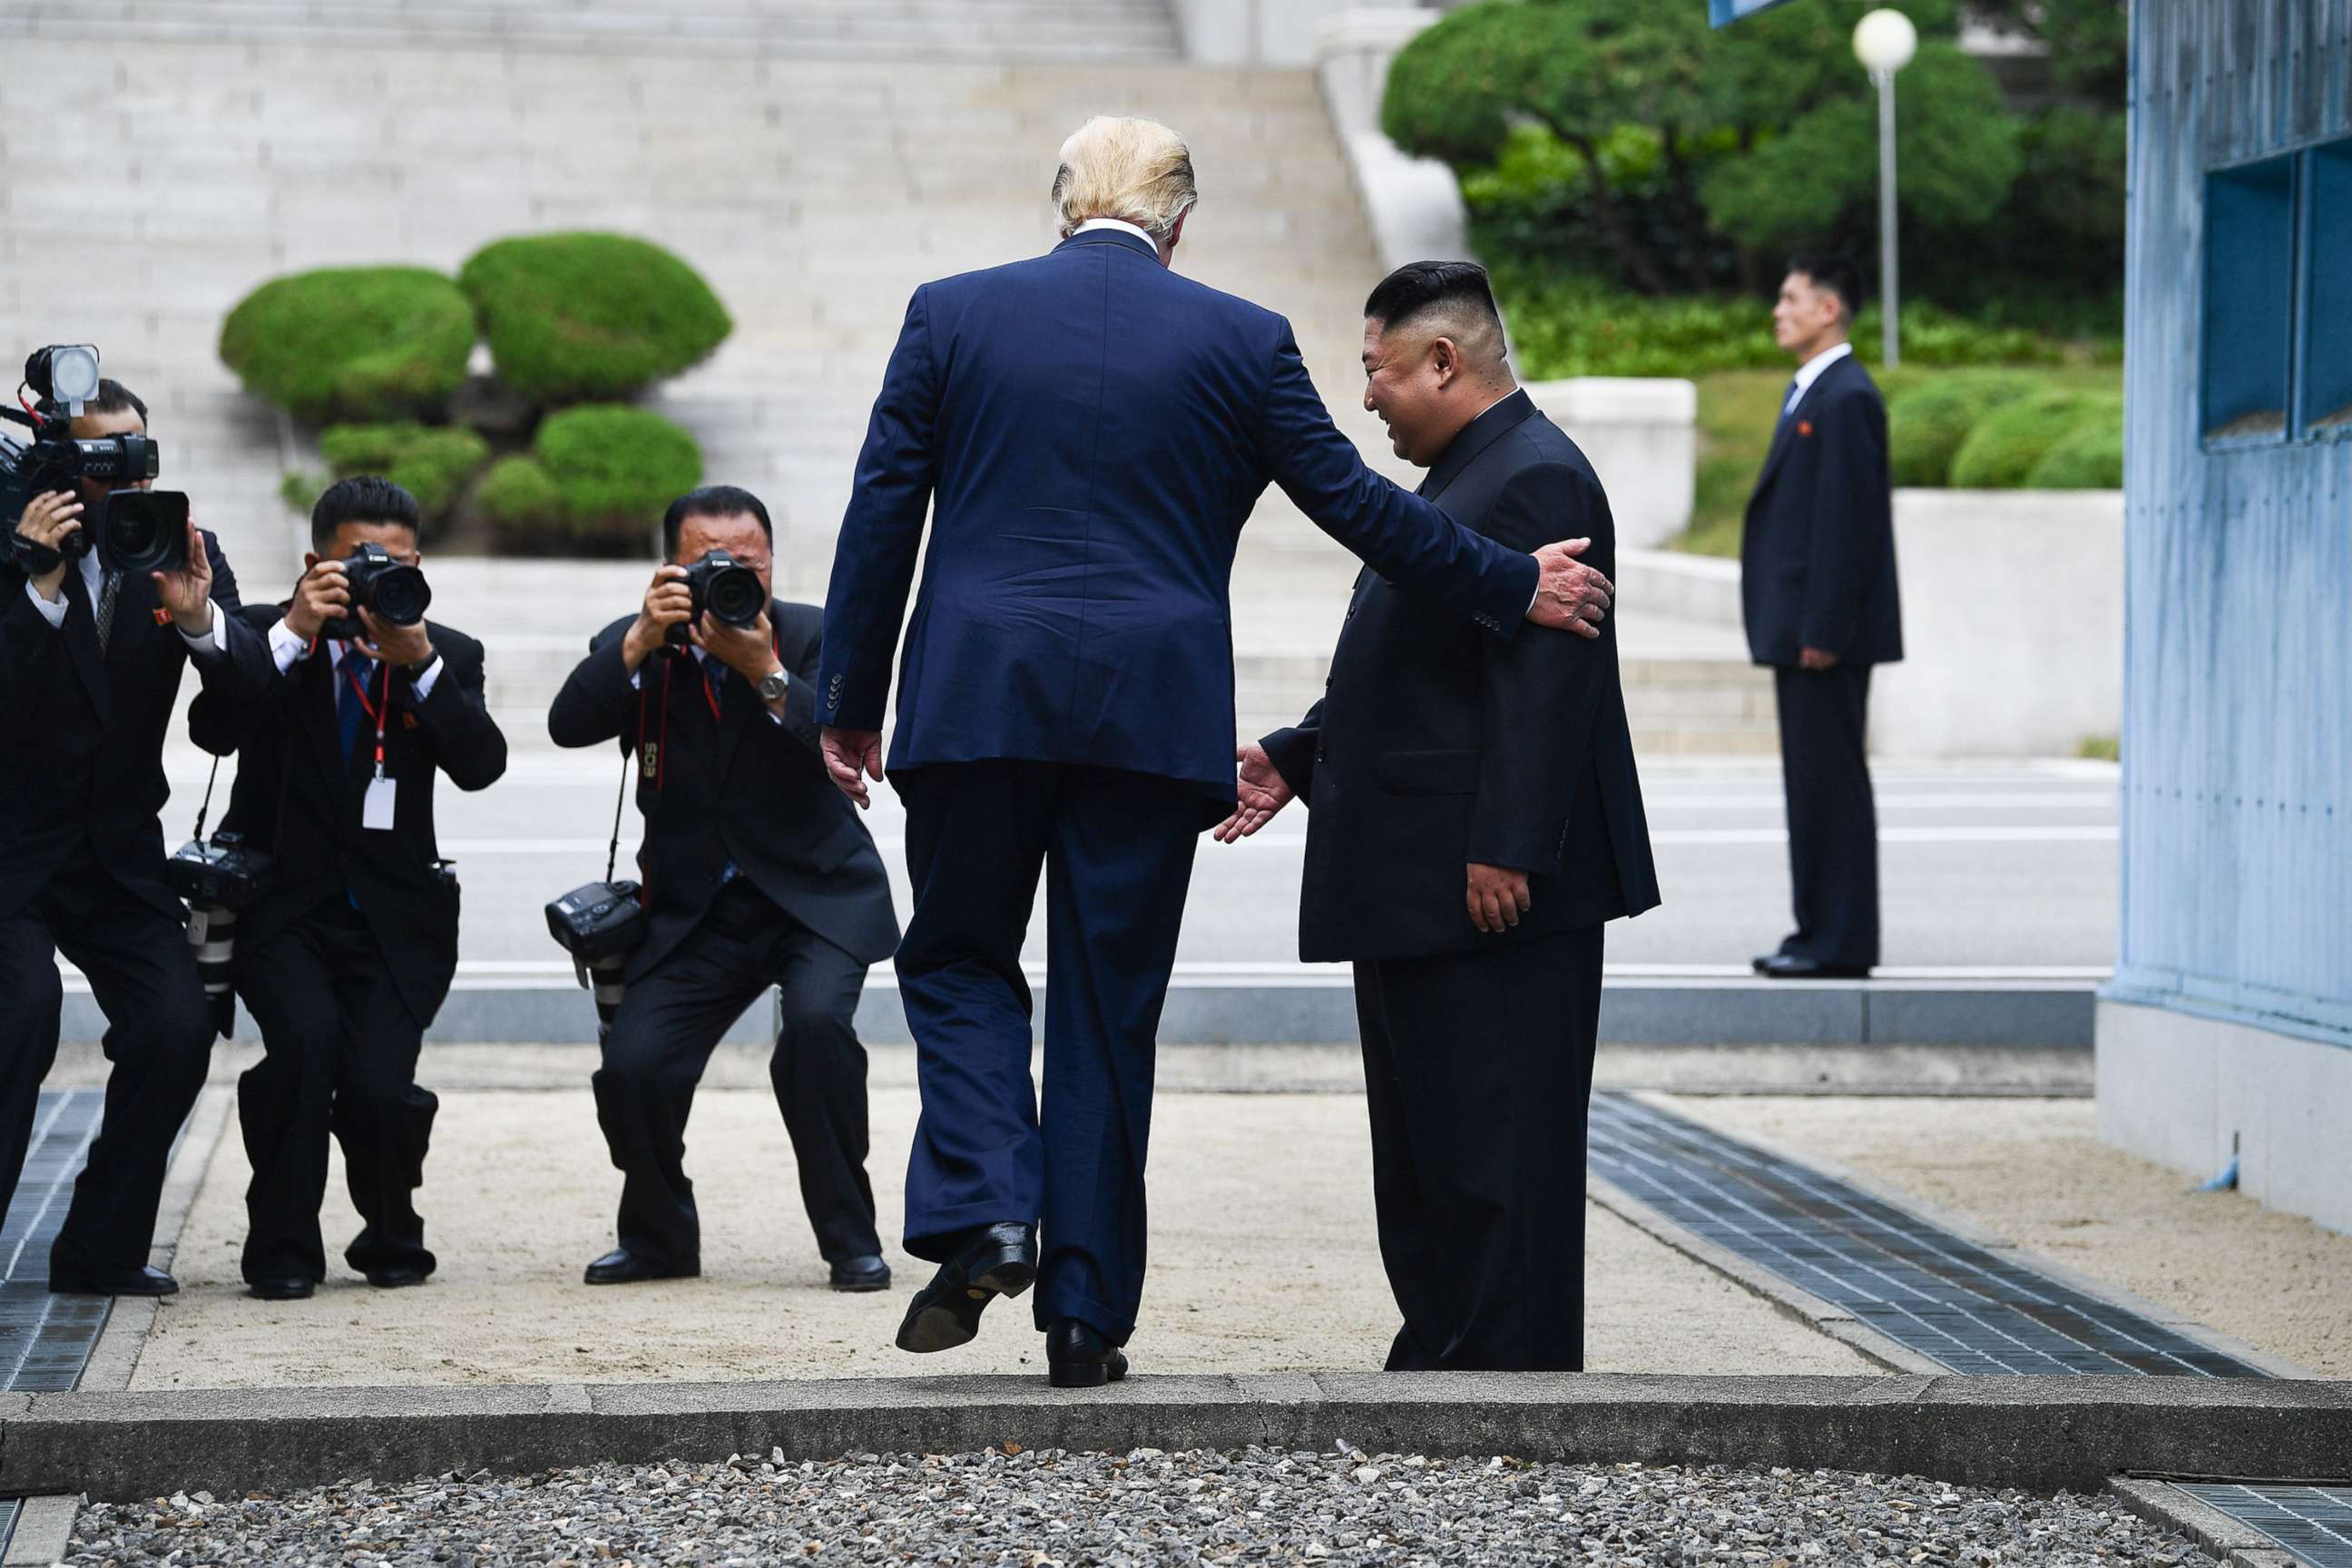 PHOTO: President Donald Trump steps into the northern side of the Military Demarcation Line that divides North and South Korea, as North Korea's leader Kim Jong Un looks on, in the Demilitarized zone (DMZ), June 30, 2019.